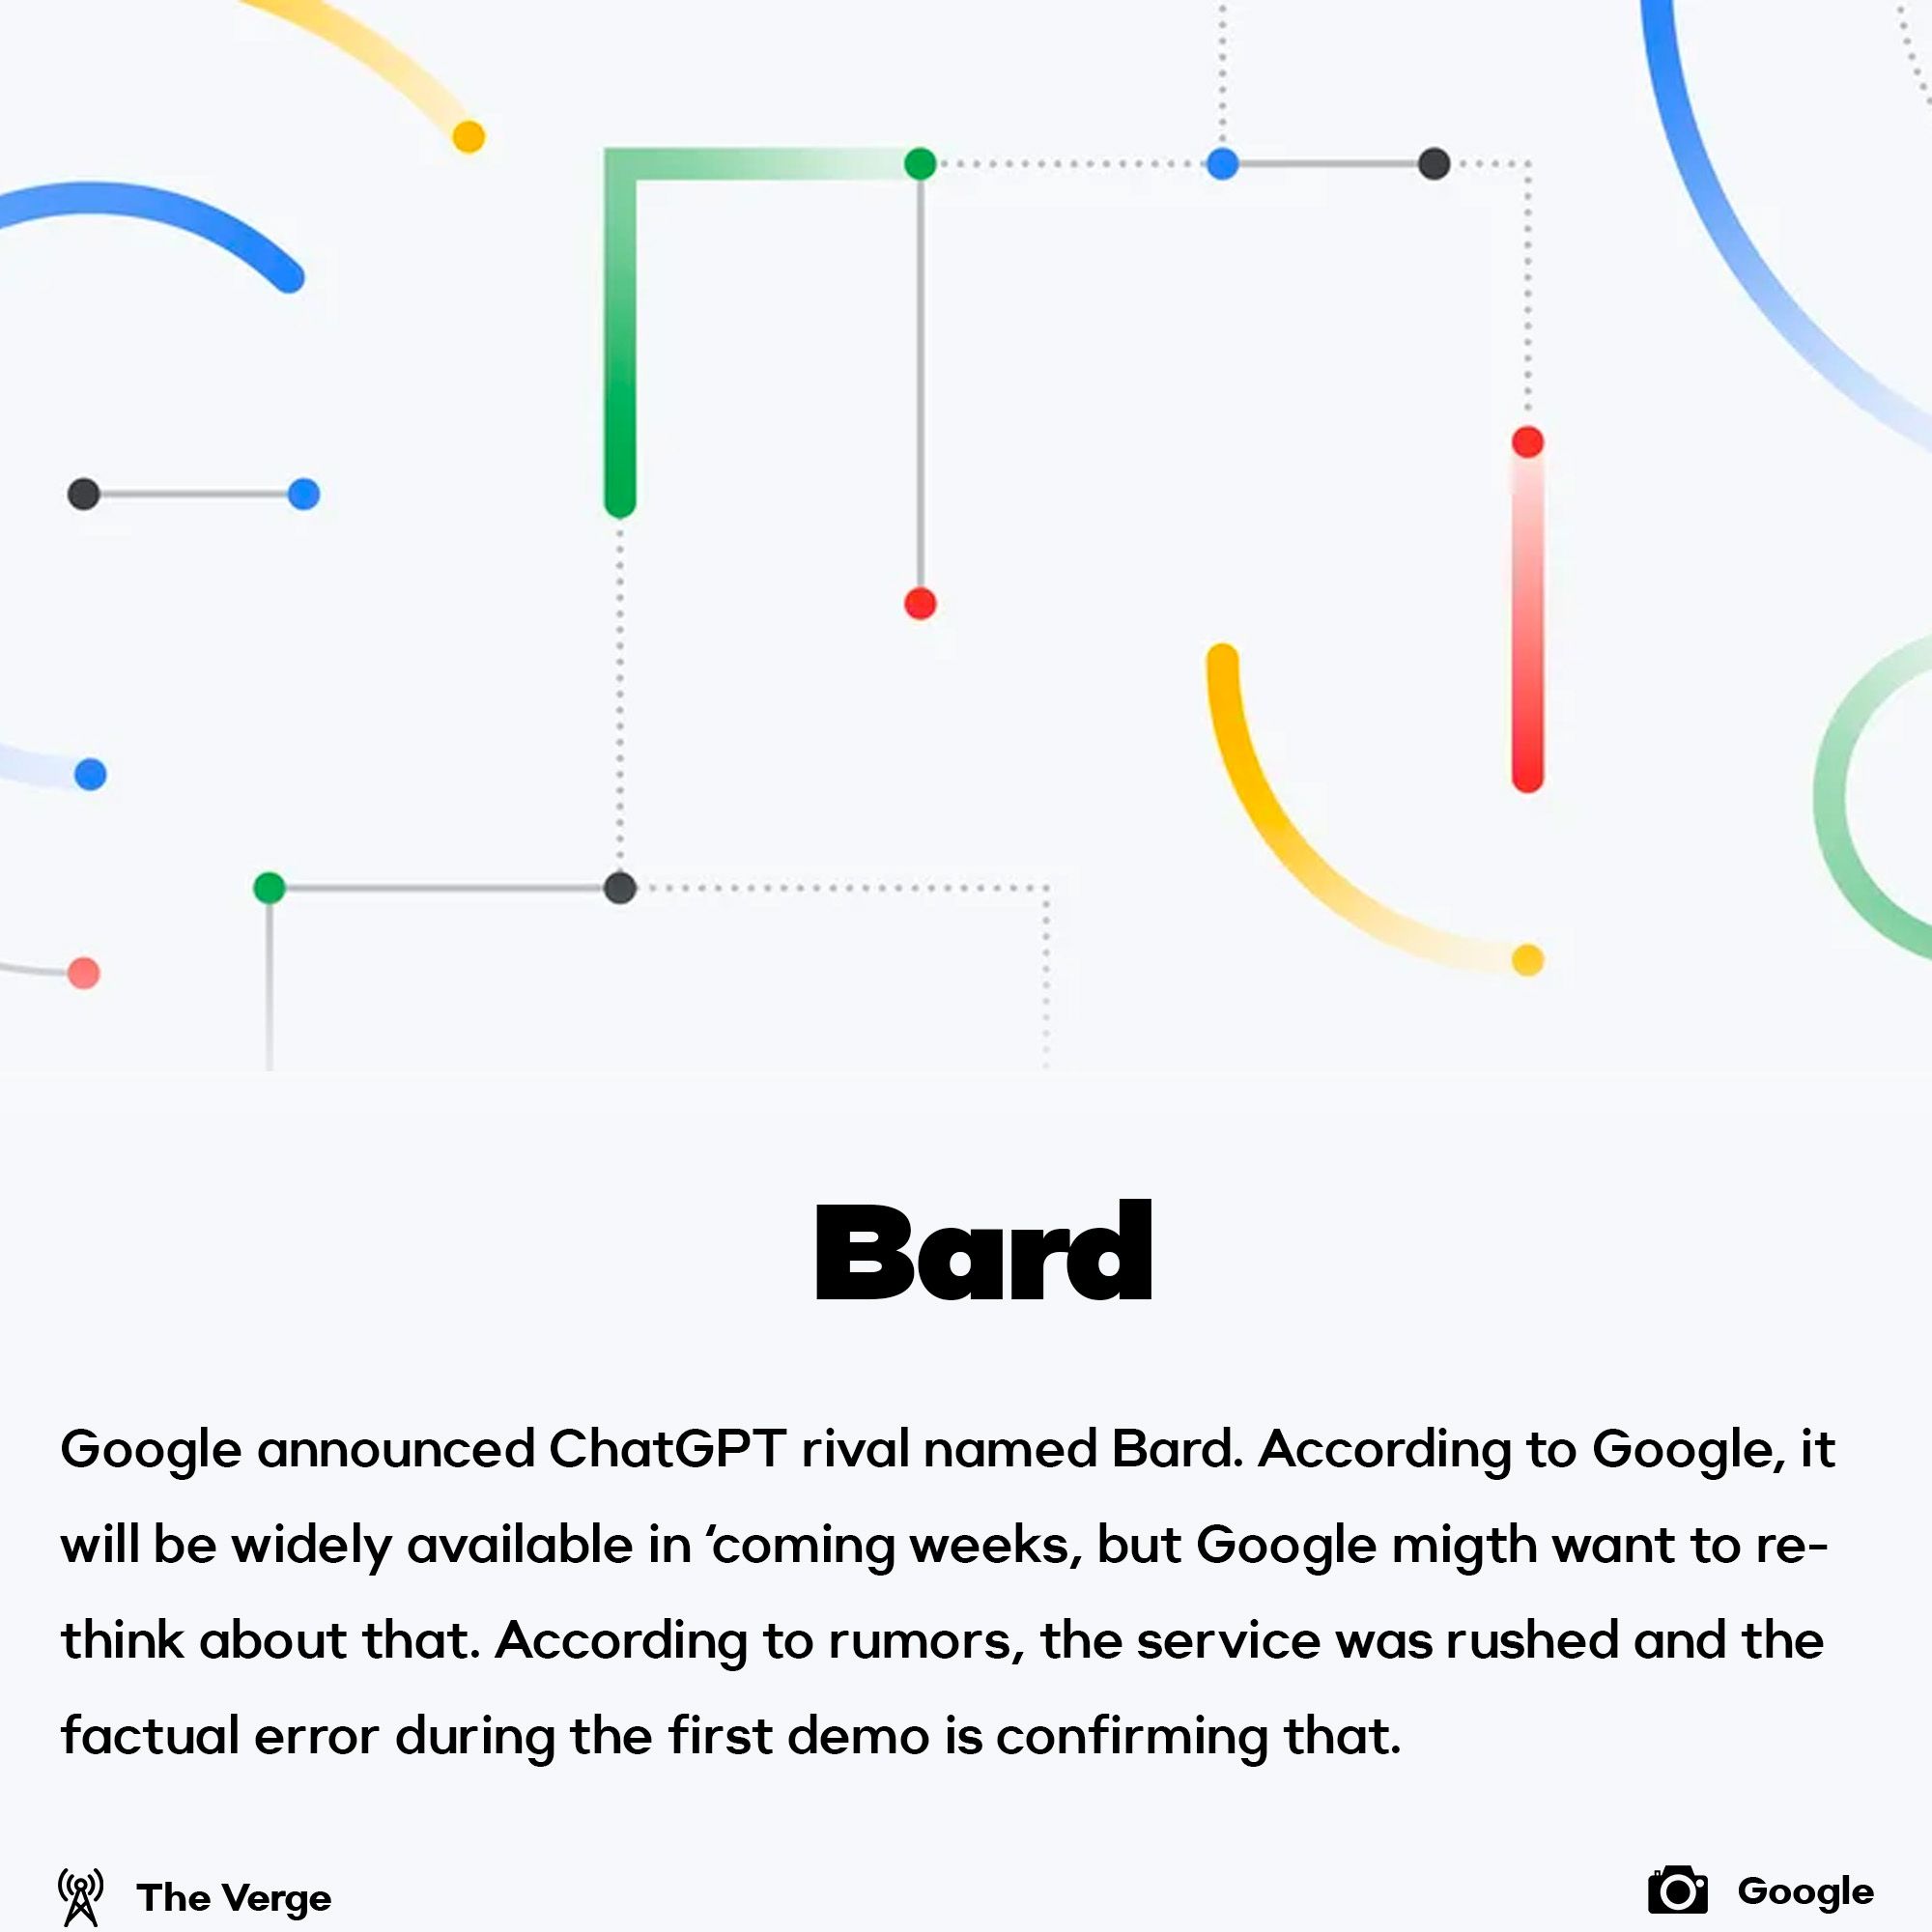 Google announced ChatGPT rival called Bard